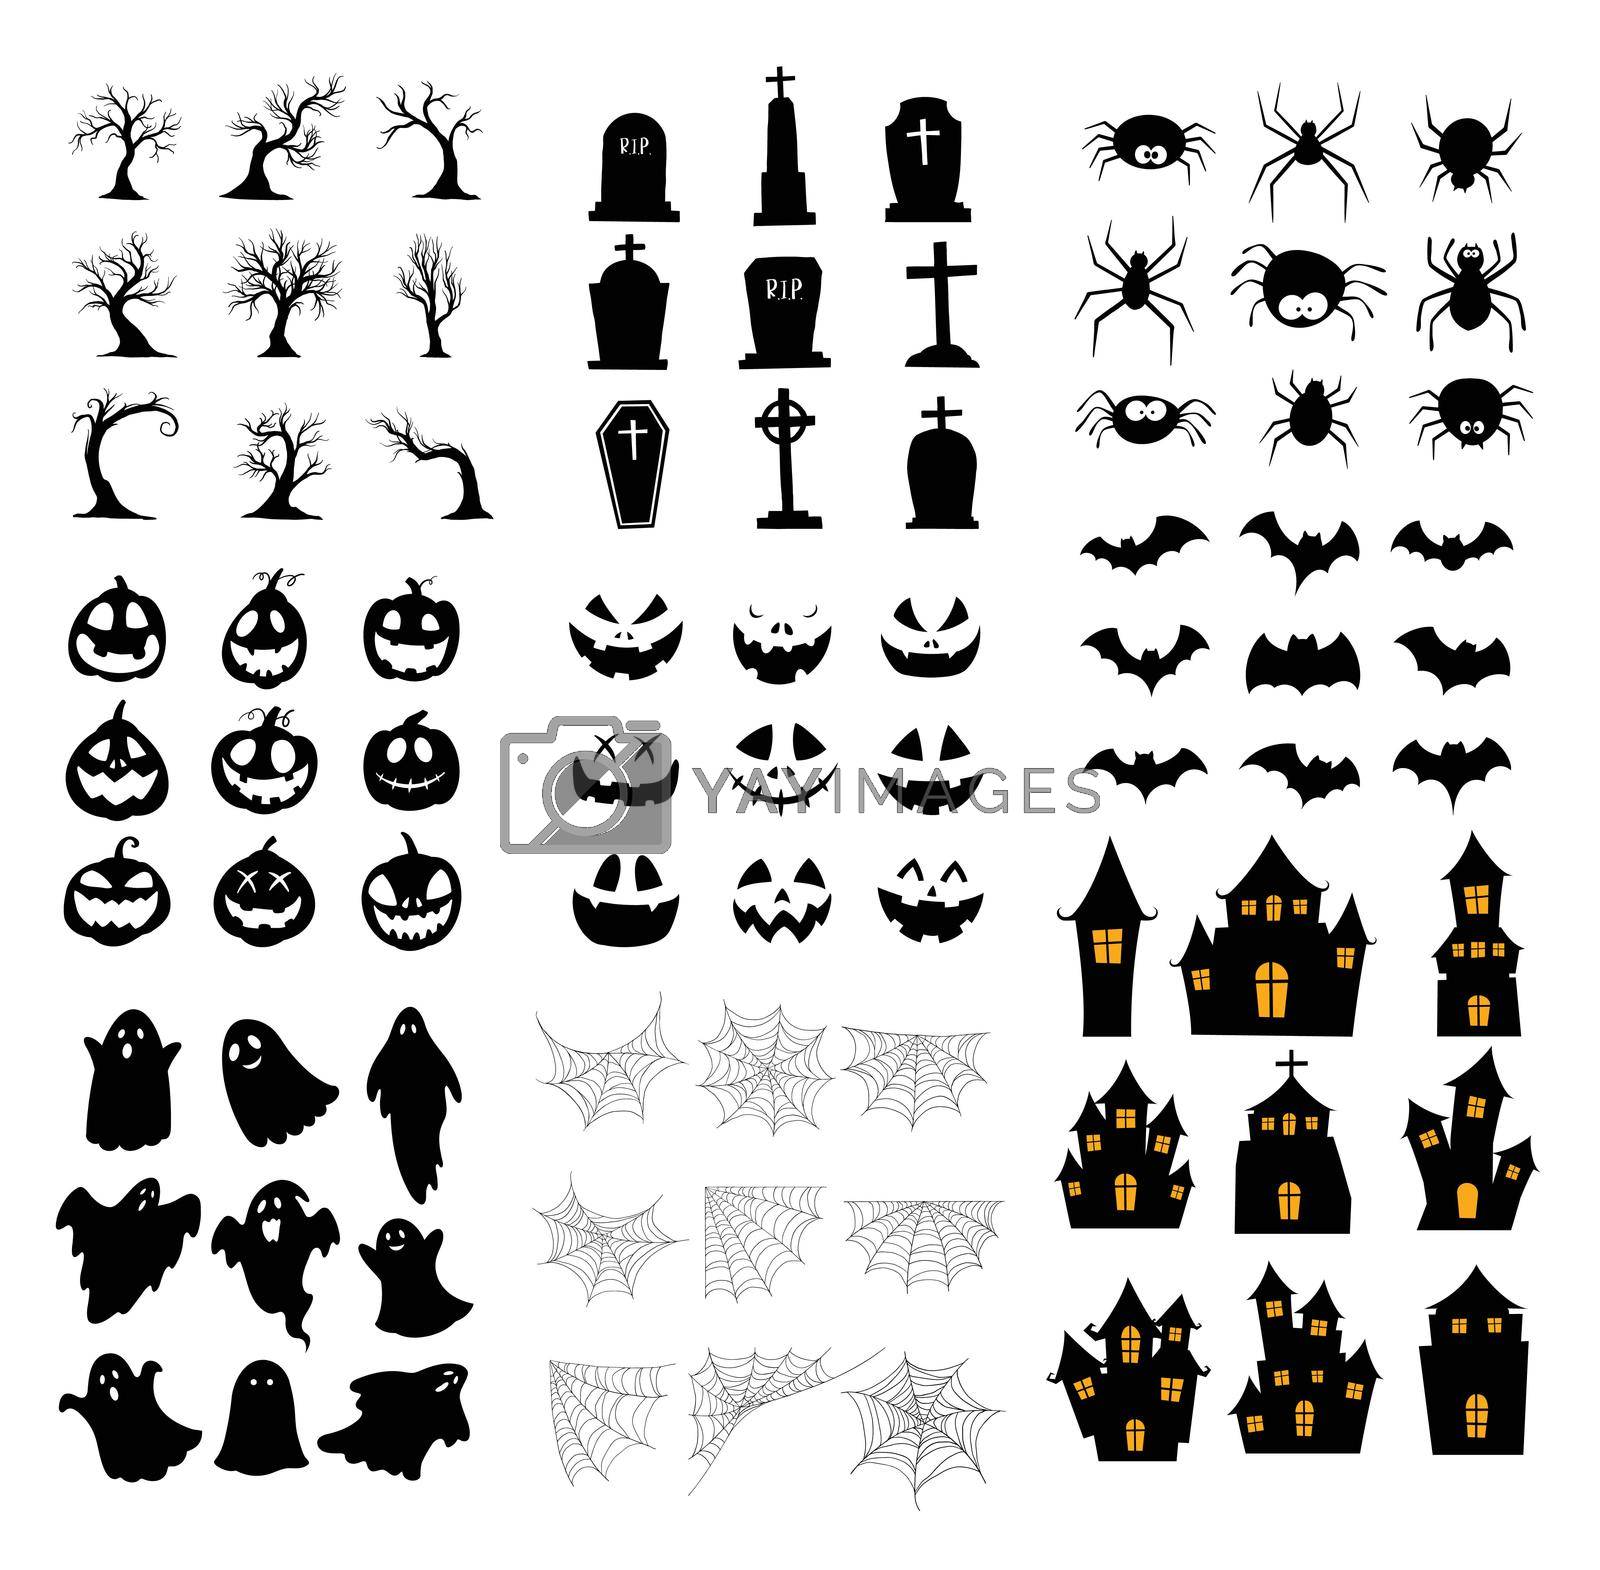 Royalty free image of Halloween silhouette set. Collection of halloween icon and element isolated on white background. by kaisorn